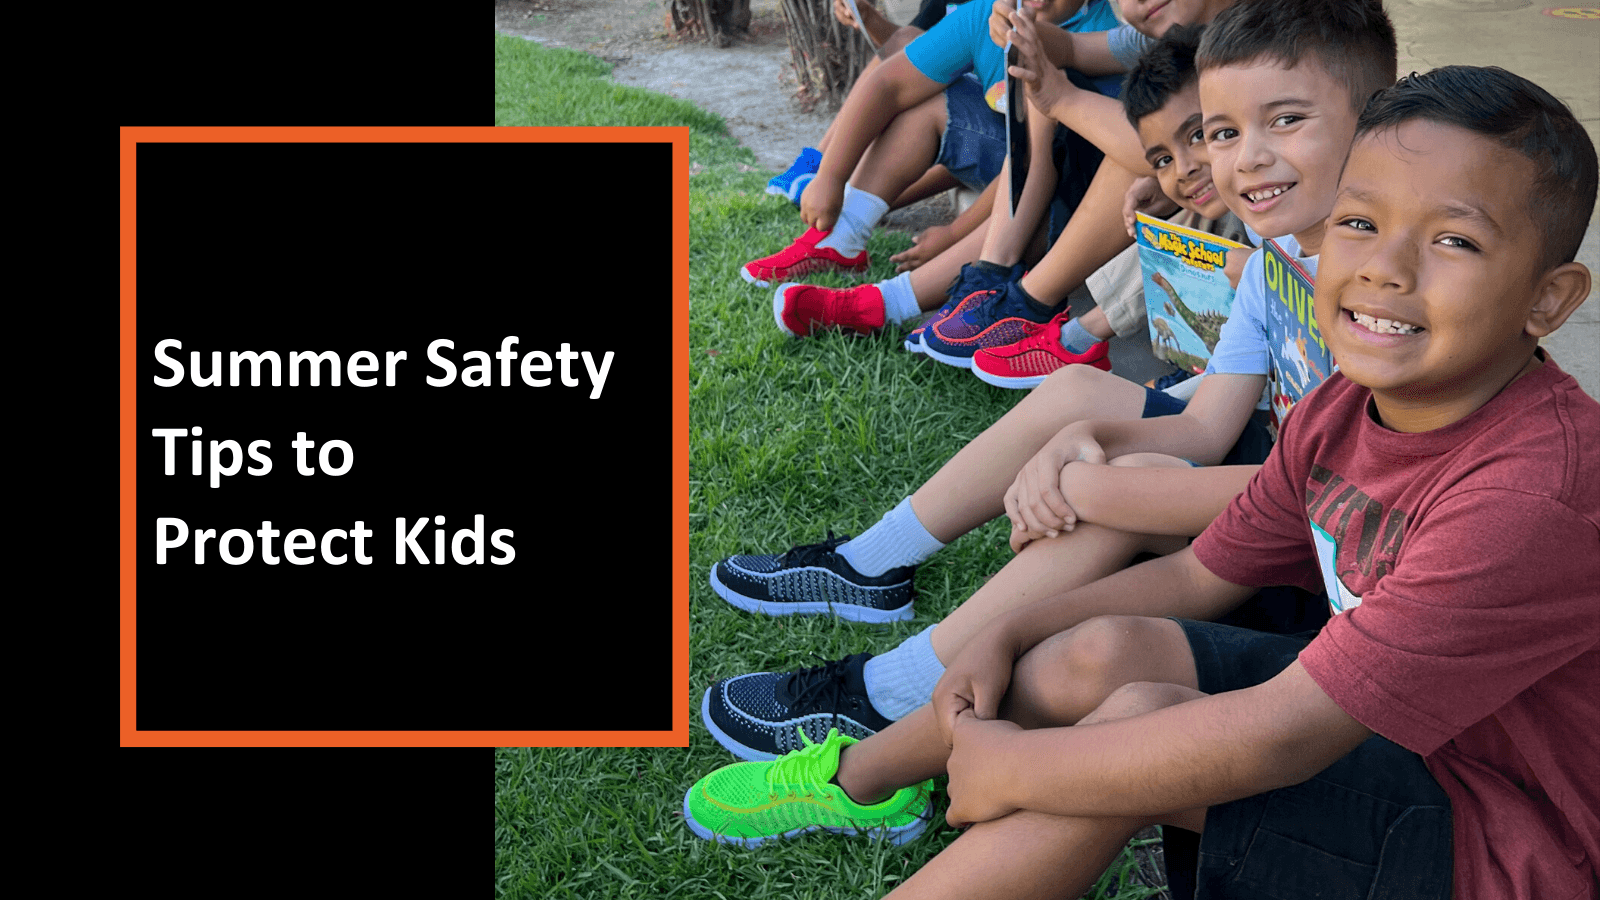 Summer Safety Tips to Protect Kids